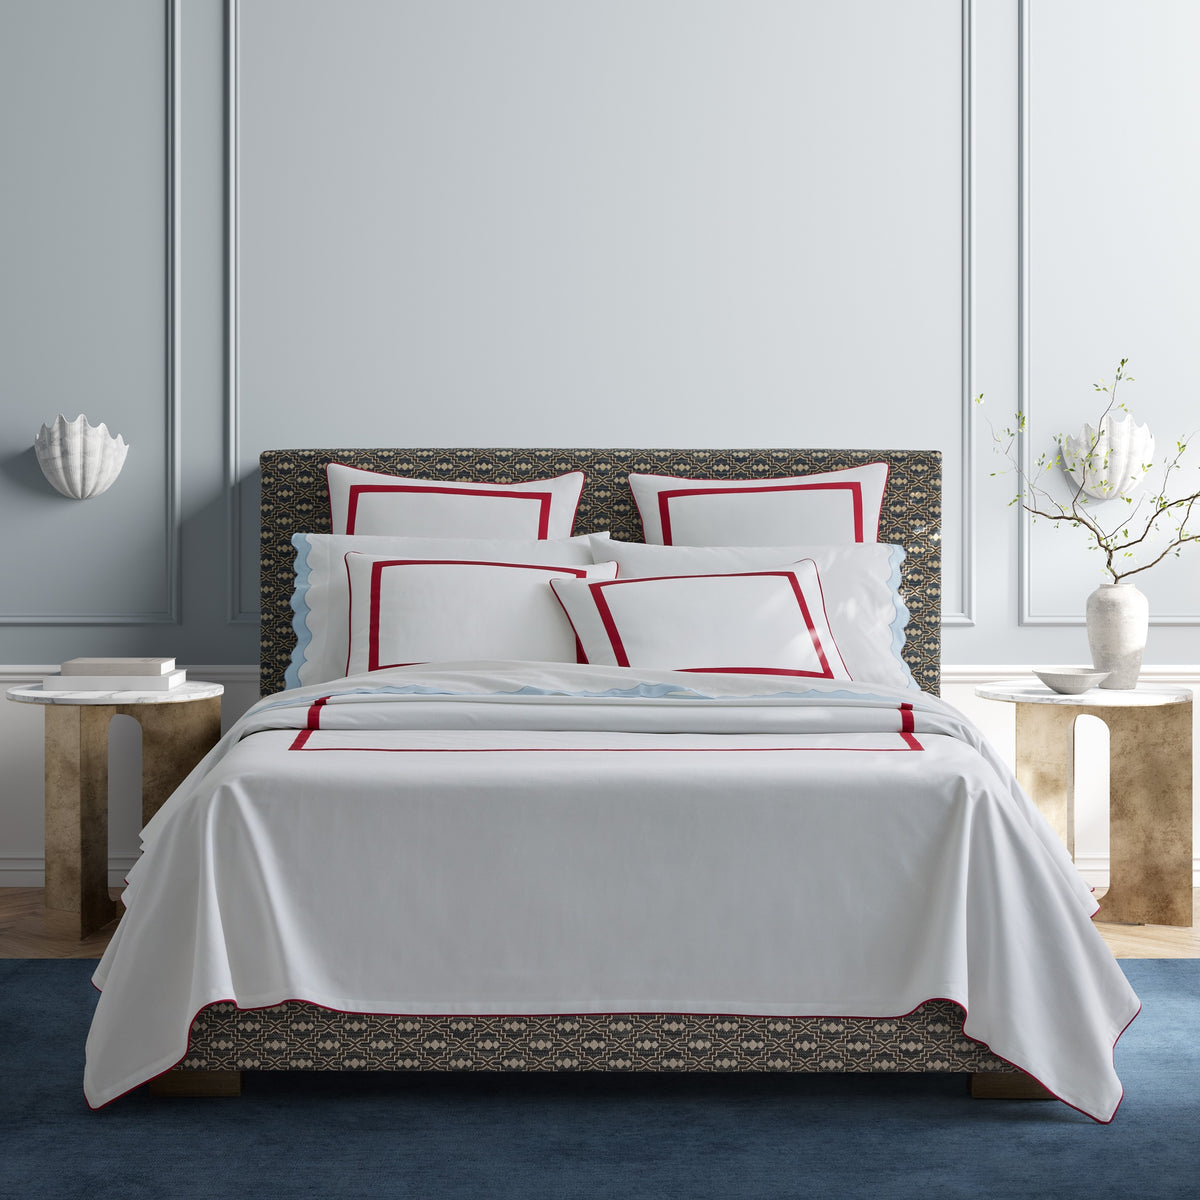 Bed Dressed in Matouk Louise Pique Bedding in Color Scarlet